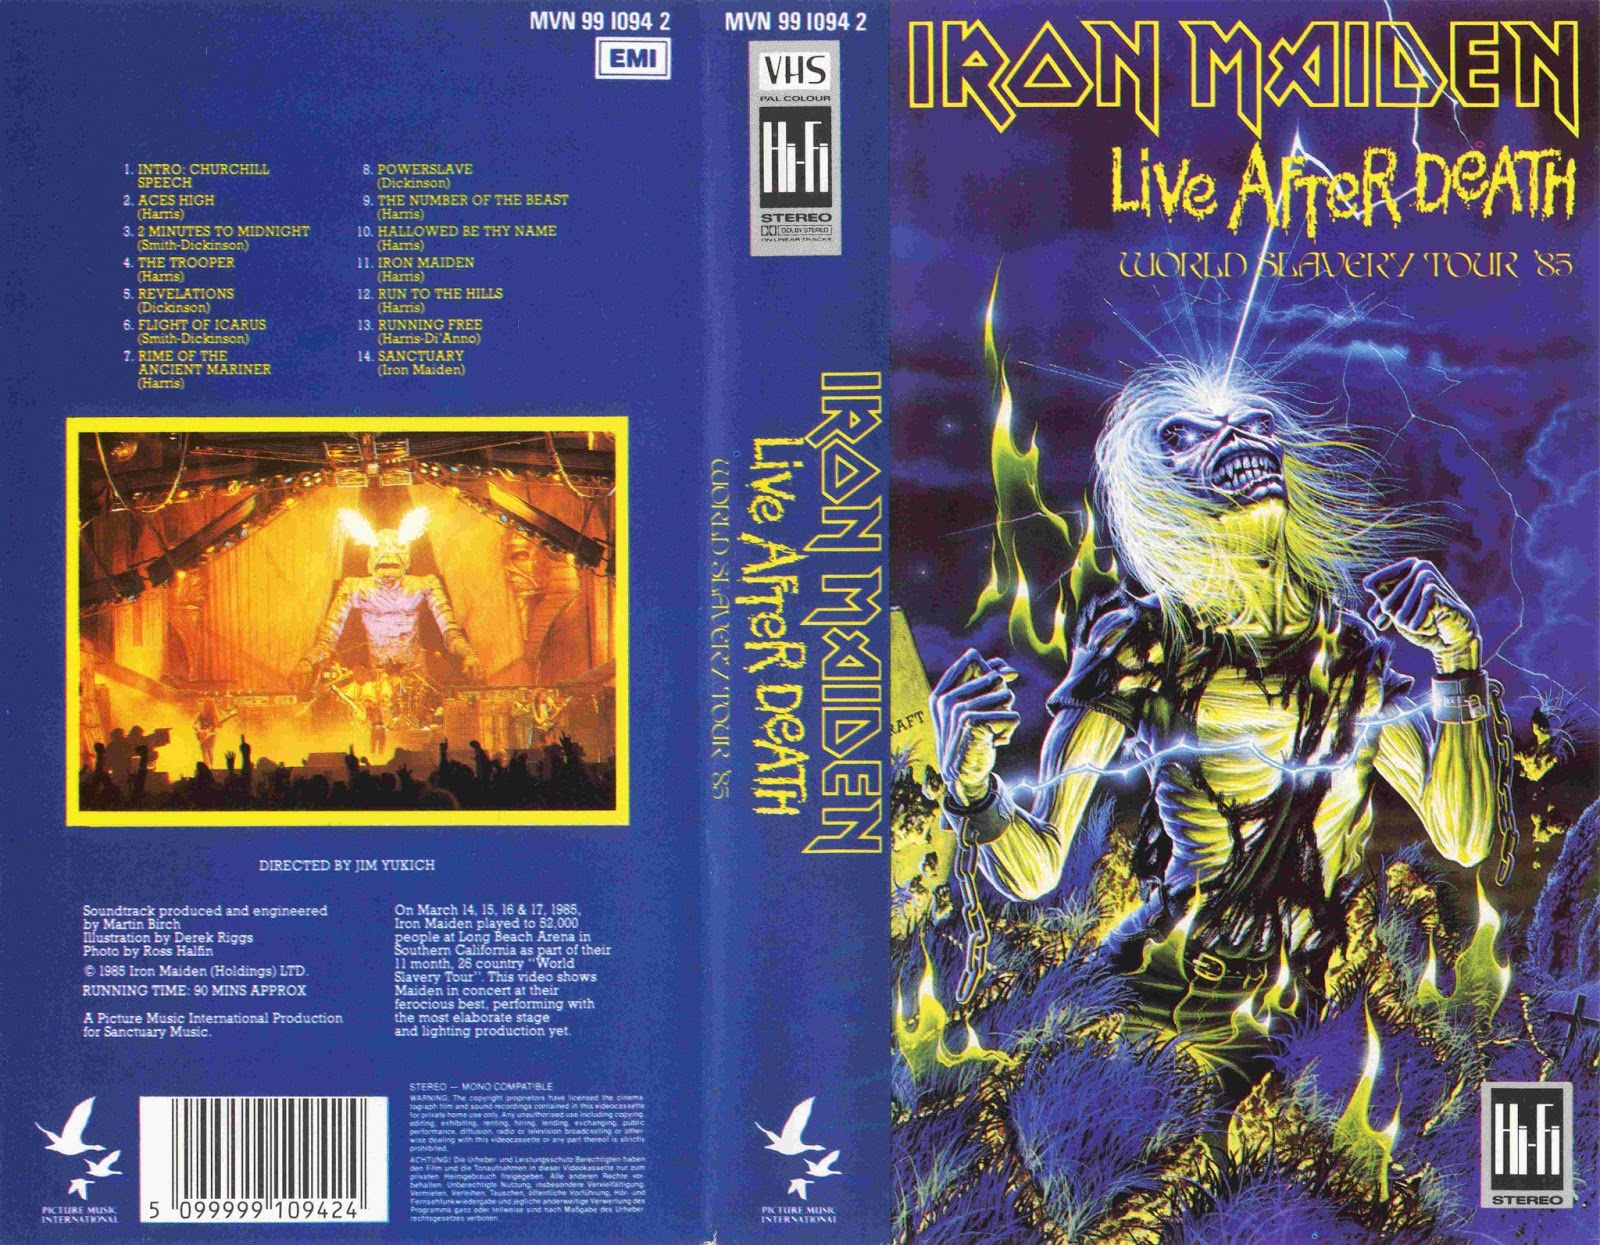 Riddle Of SteeL - MetaL Music: Iron Maiden - Live After Death, World